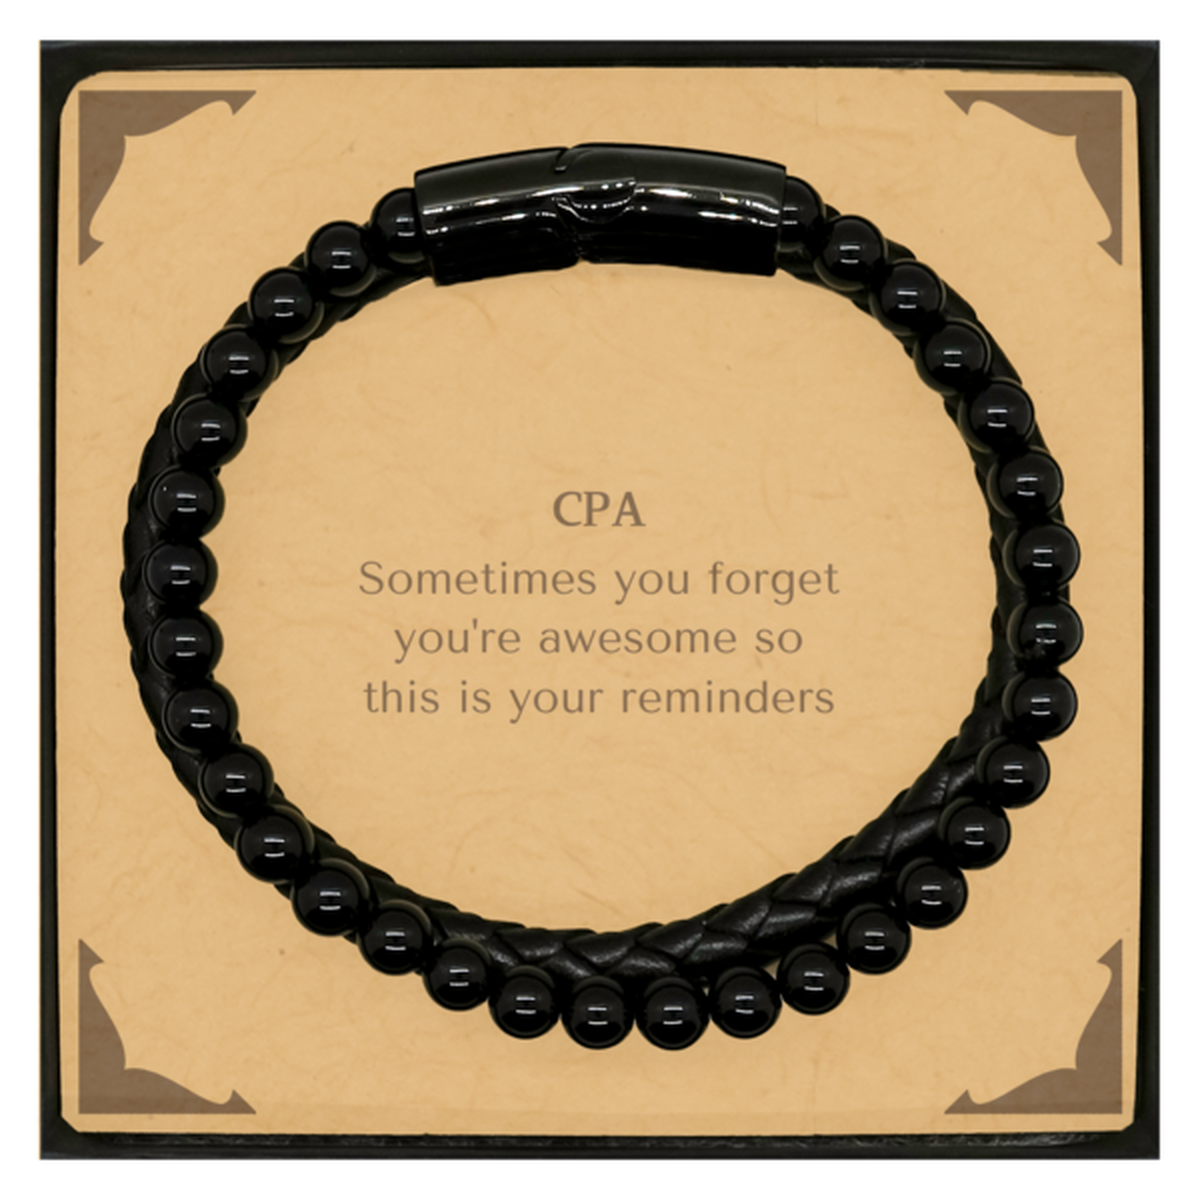 Sentimental CPA Stone Leather Bracelets, CPA Sometimes you forget you're awesome so this is your reminders, Graduation Christmas Birthday Gifts for CPA, Men, Women, Coworkers